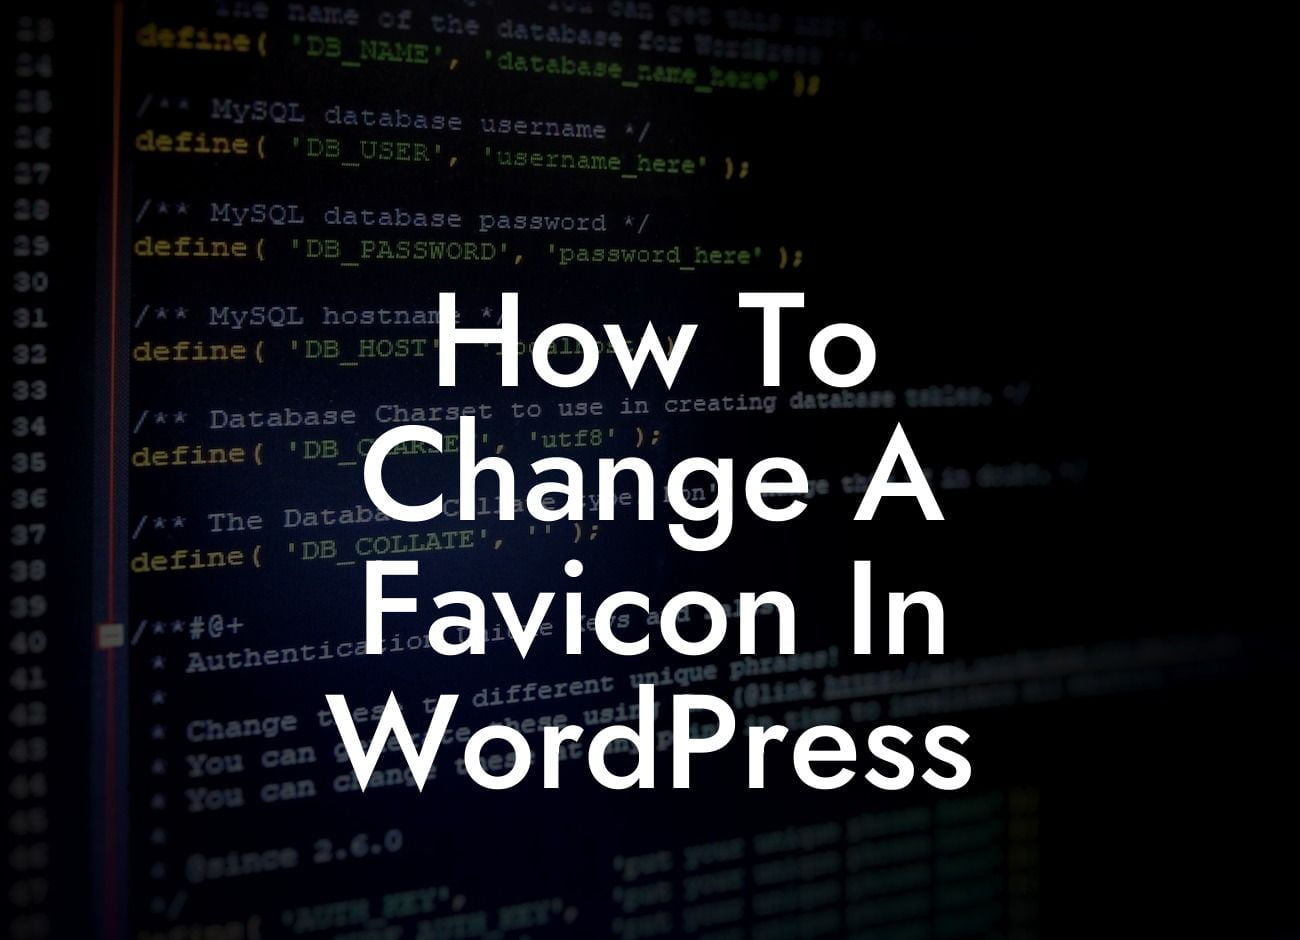 How To Change A Favicon In WordPress